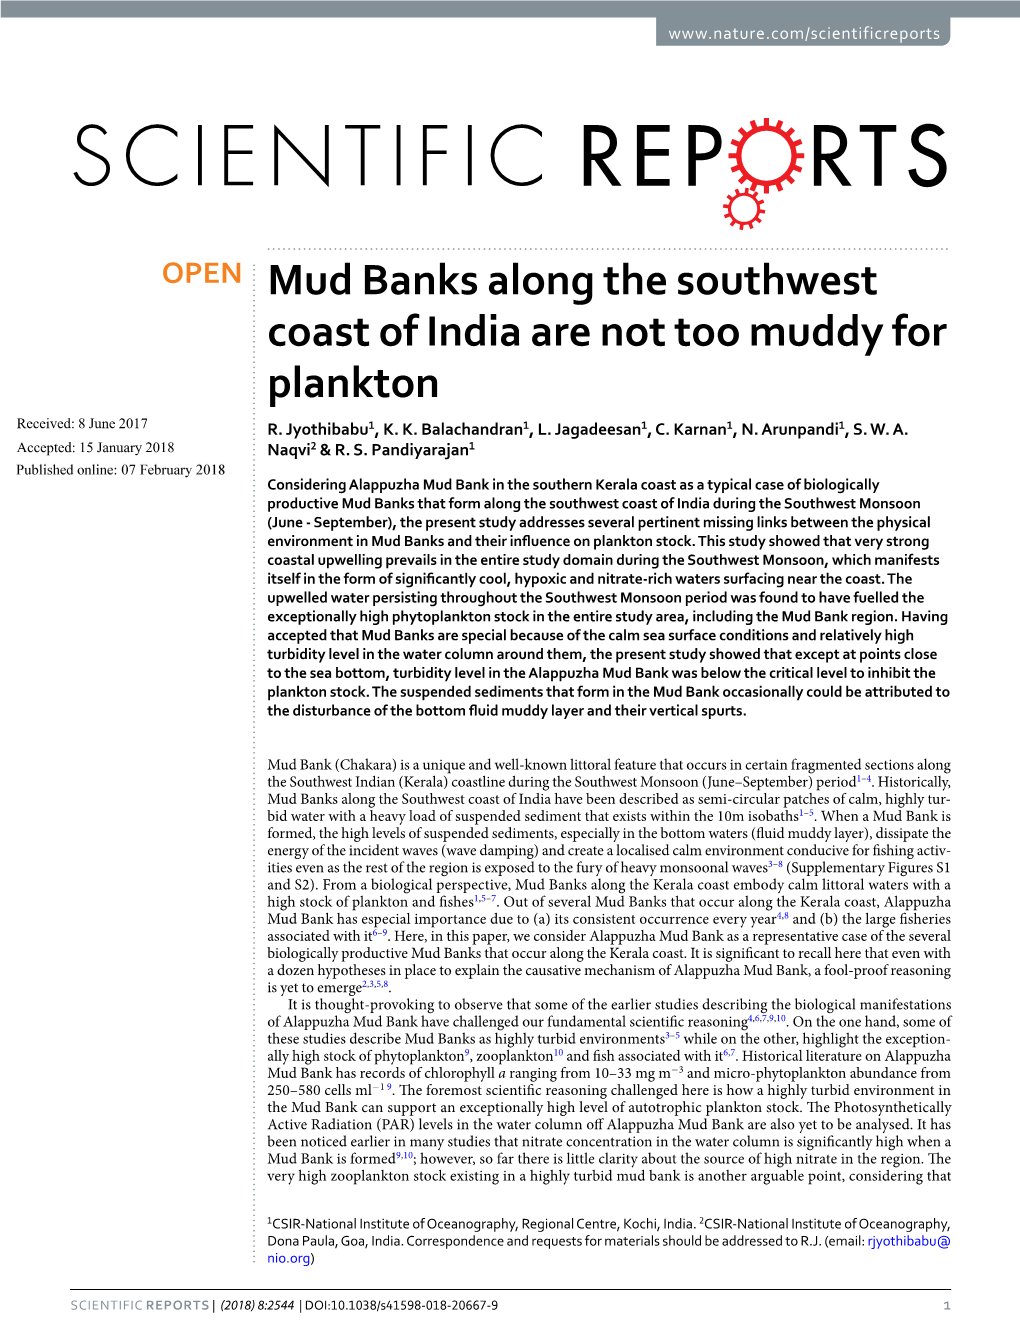 Mud Banks Along the Southwest Coast of India Are Not Too Muddy for Plankton Received: 8 June 2017 R